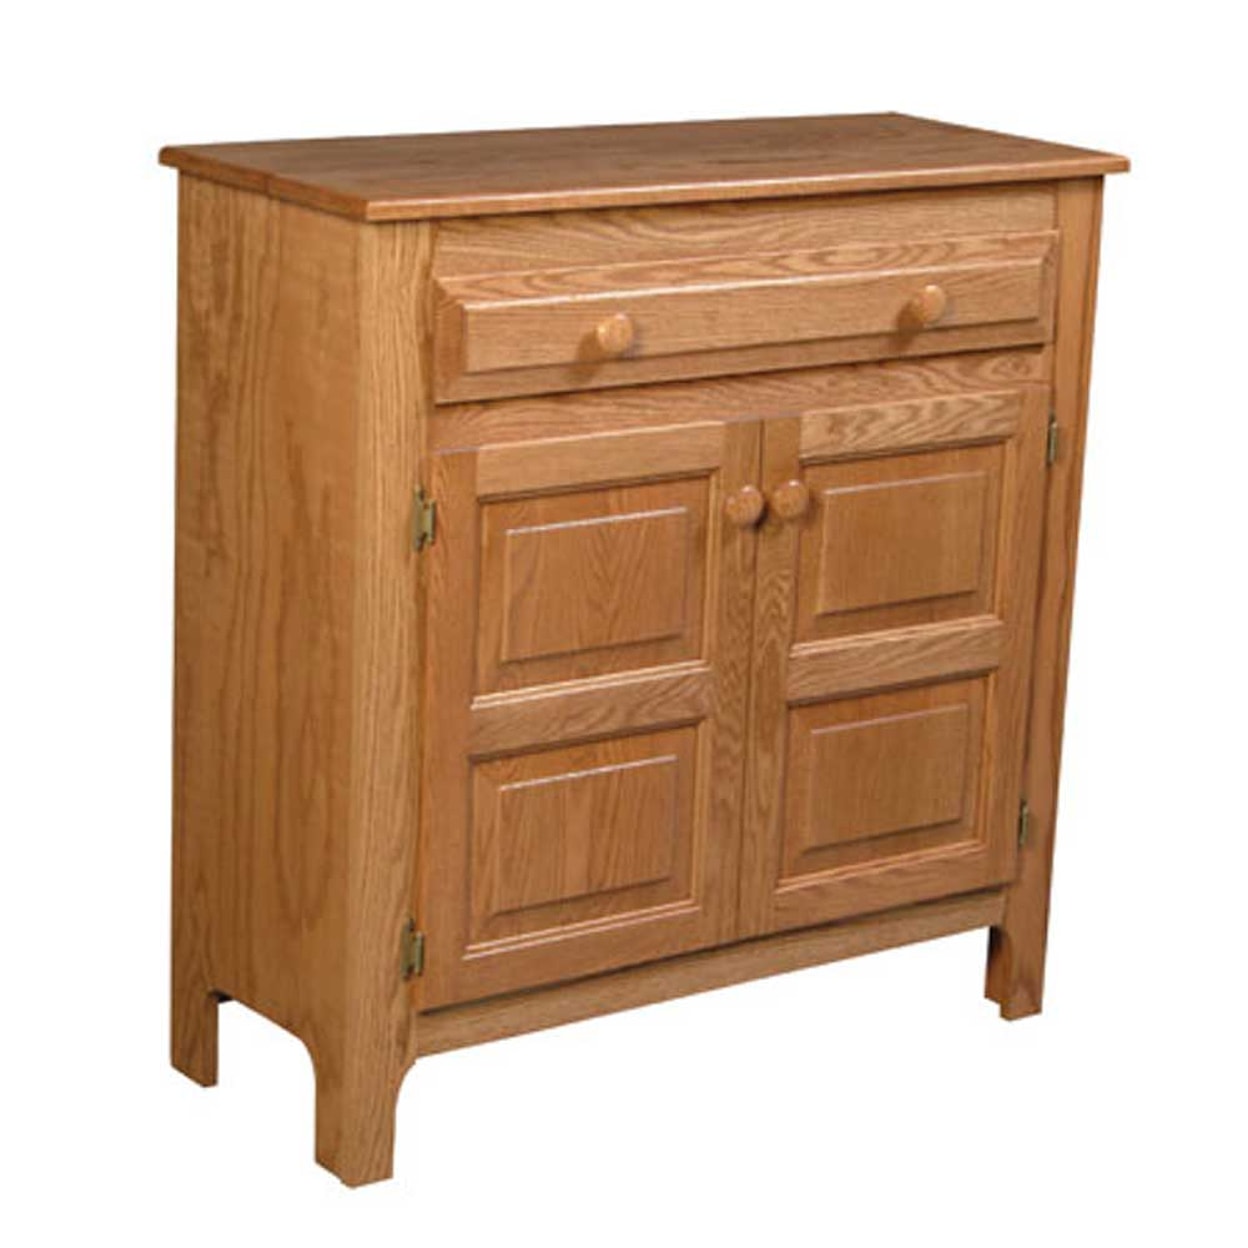 Simply Amish Country 1-Drawer Pie Safe